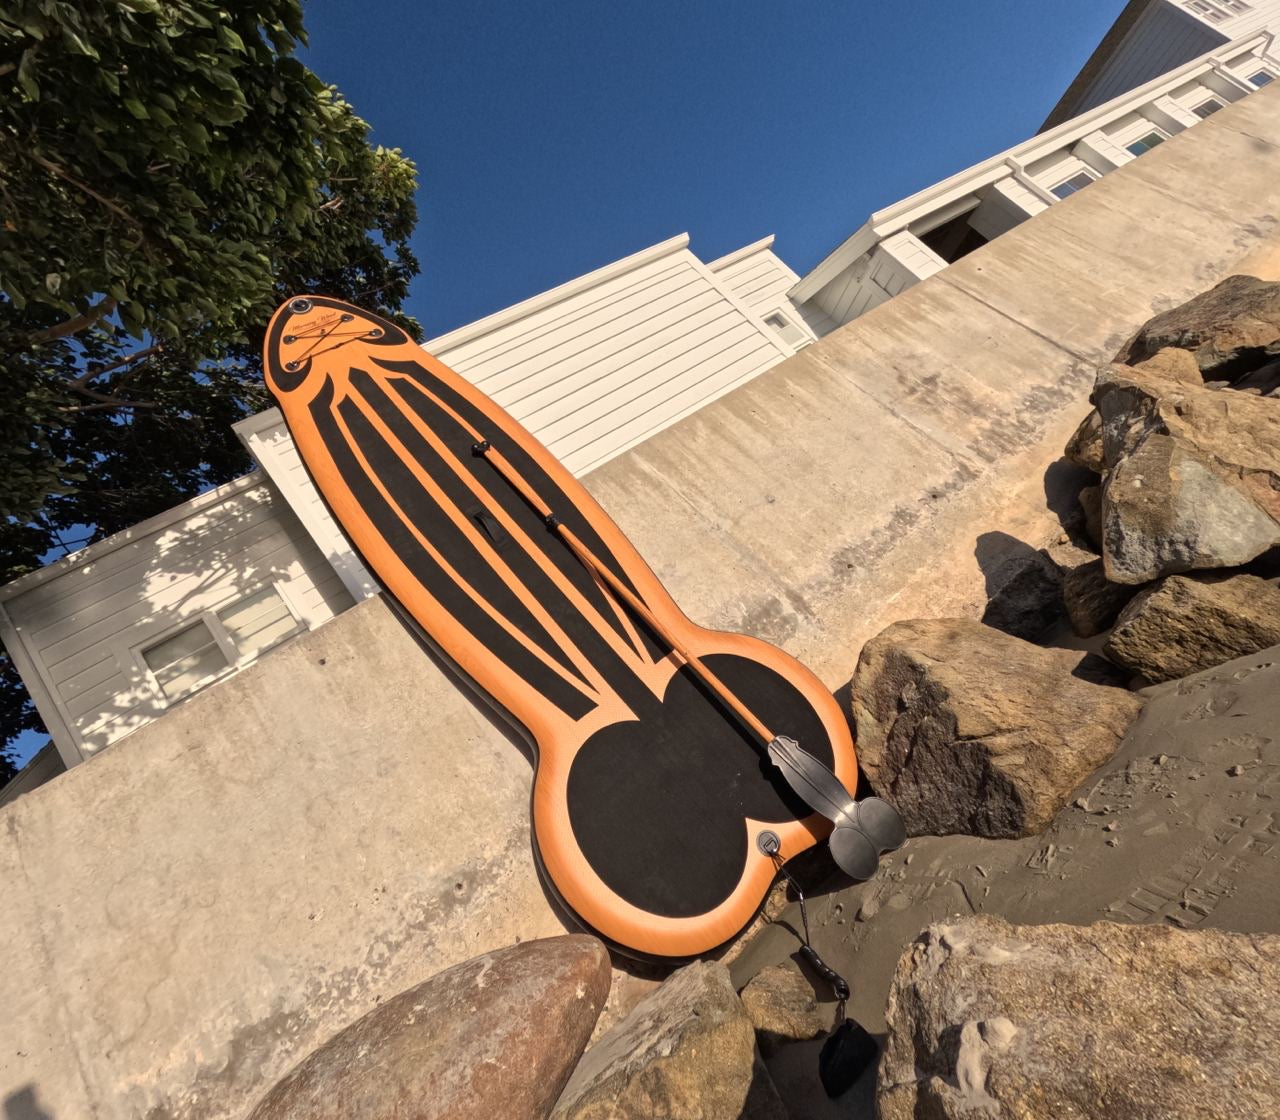 Morning Wood Inflatable Paddle Board